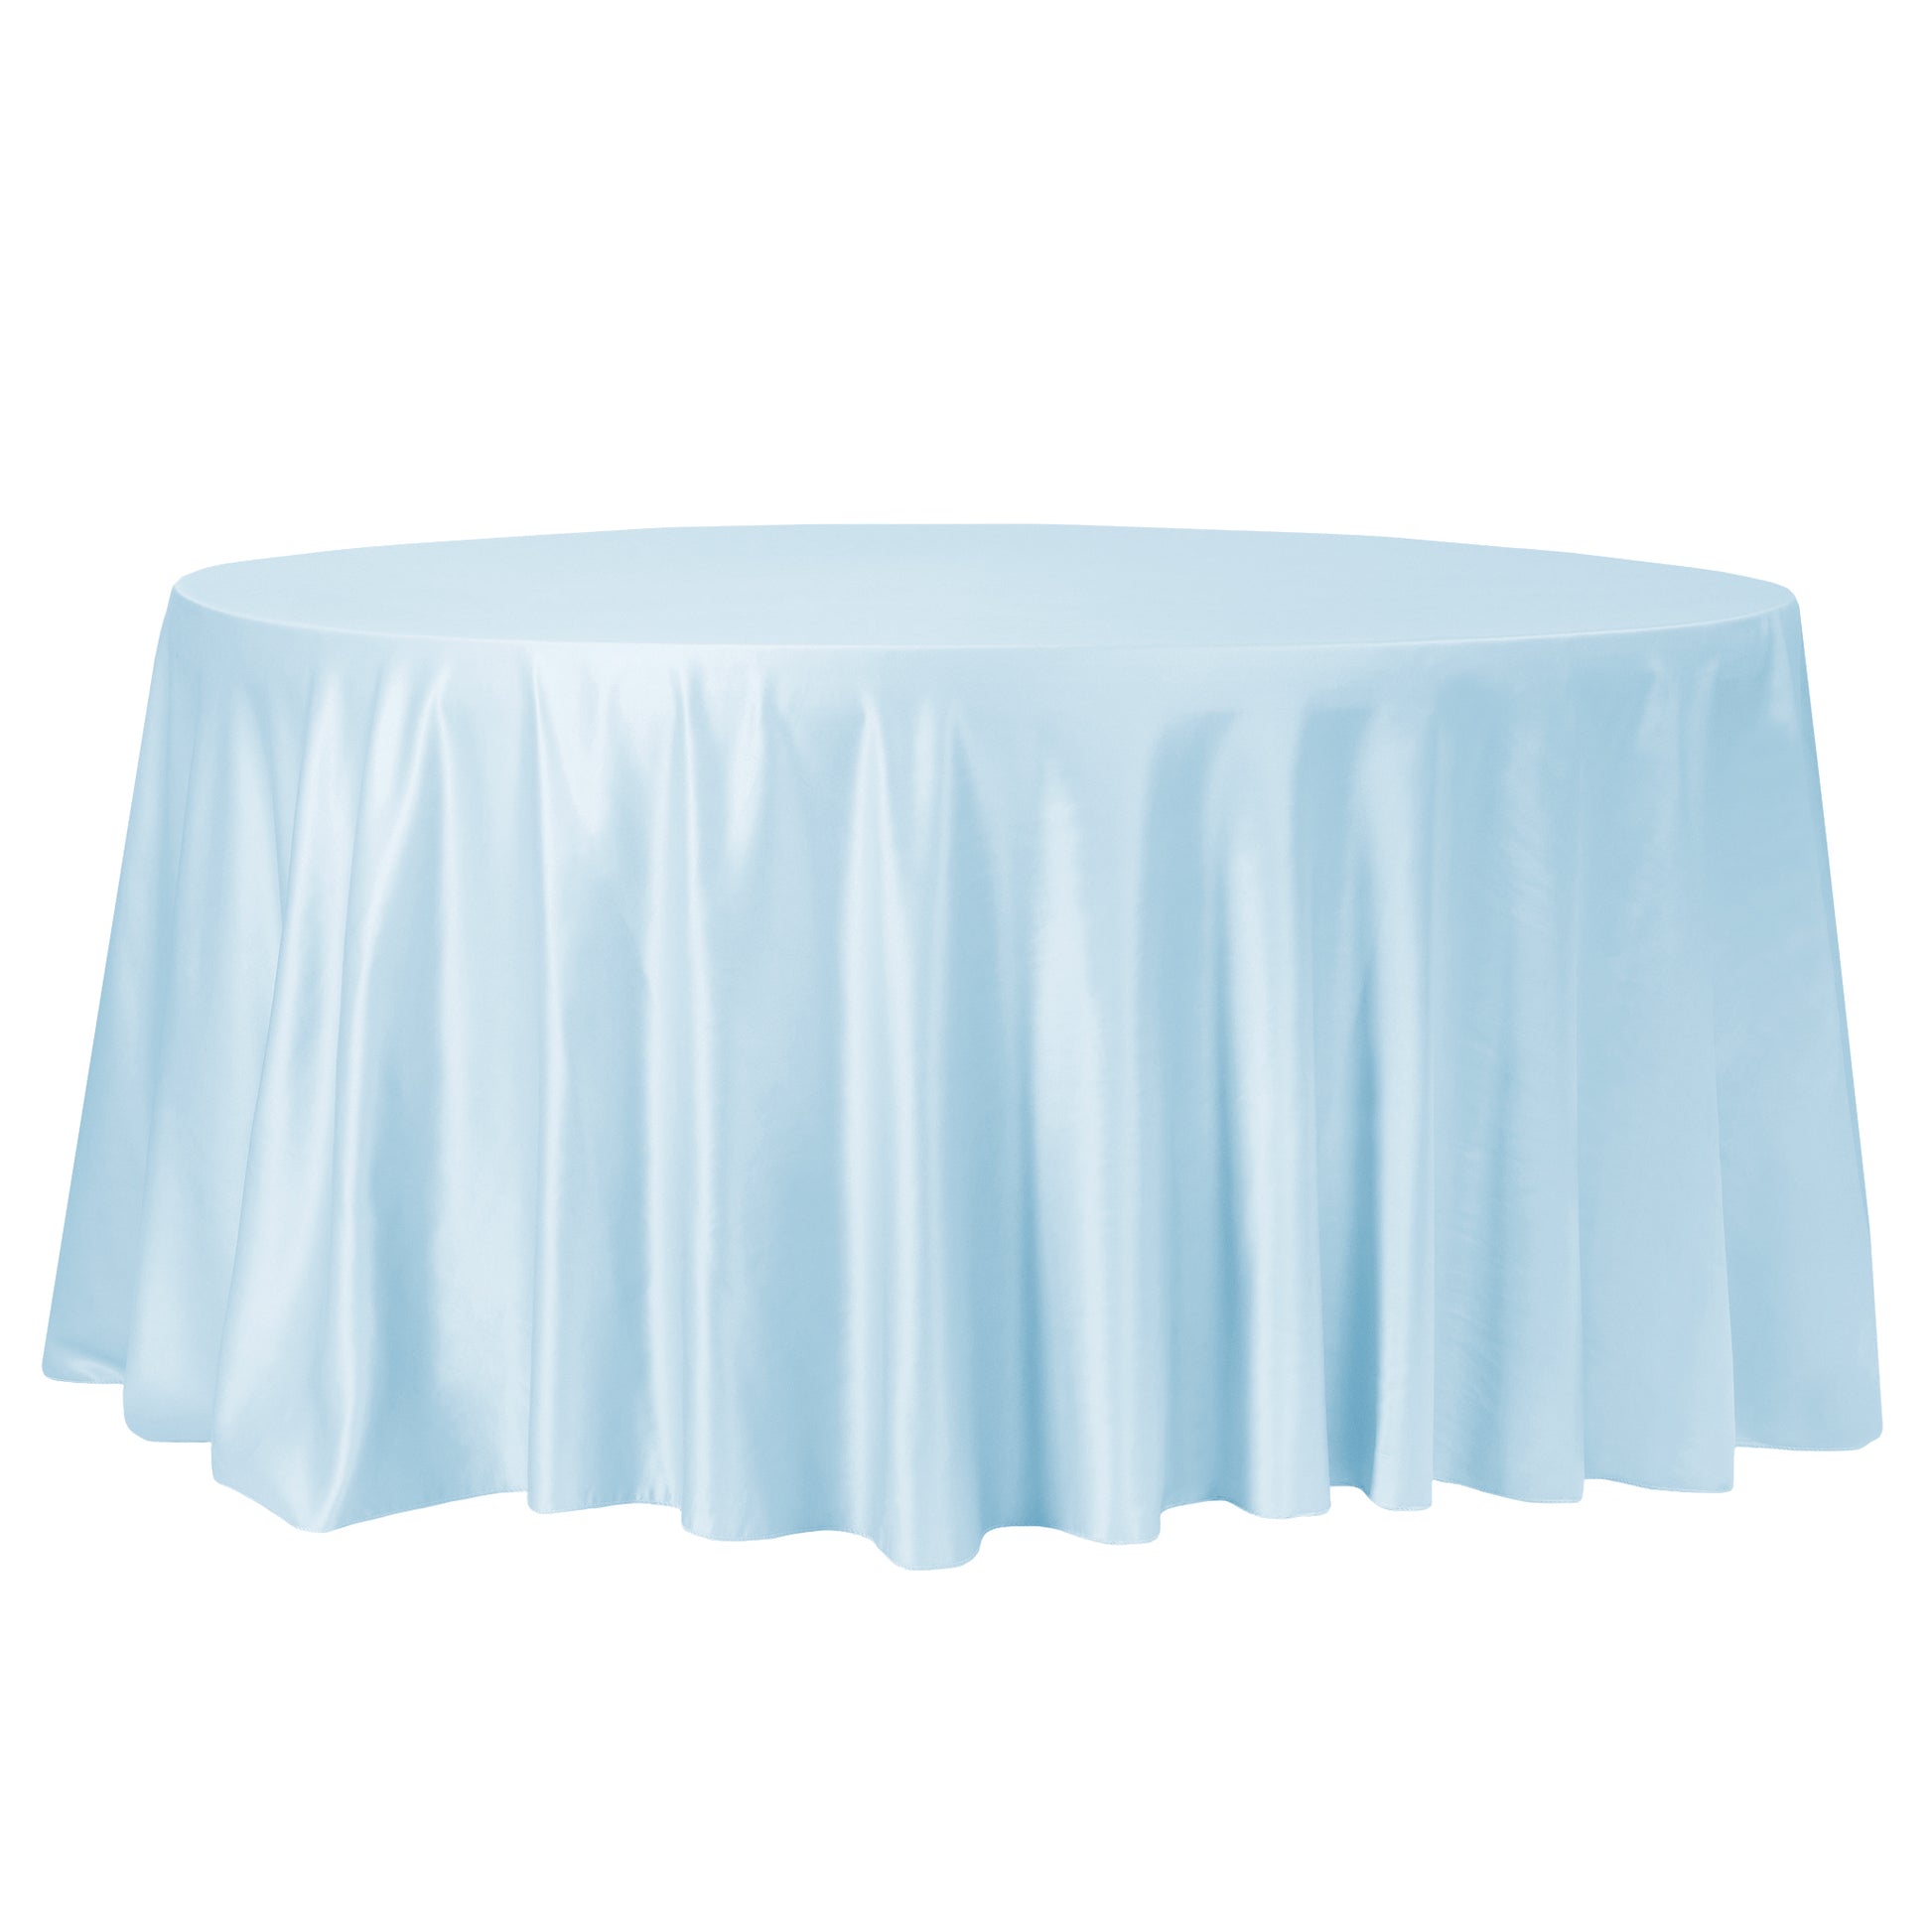 Lamour Satin 120" Round Tablecloth - Baby Blue - CV Linens